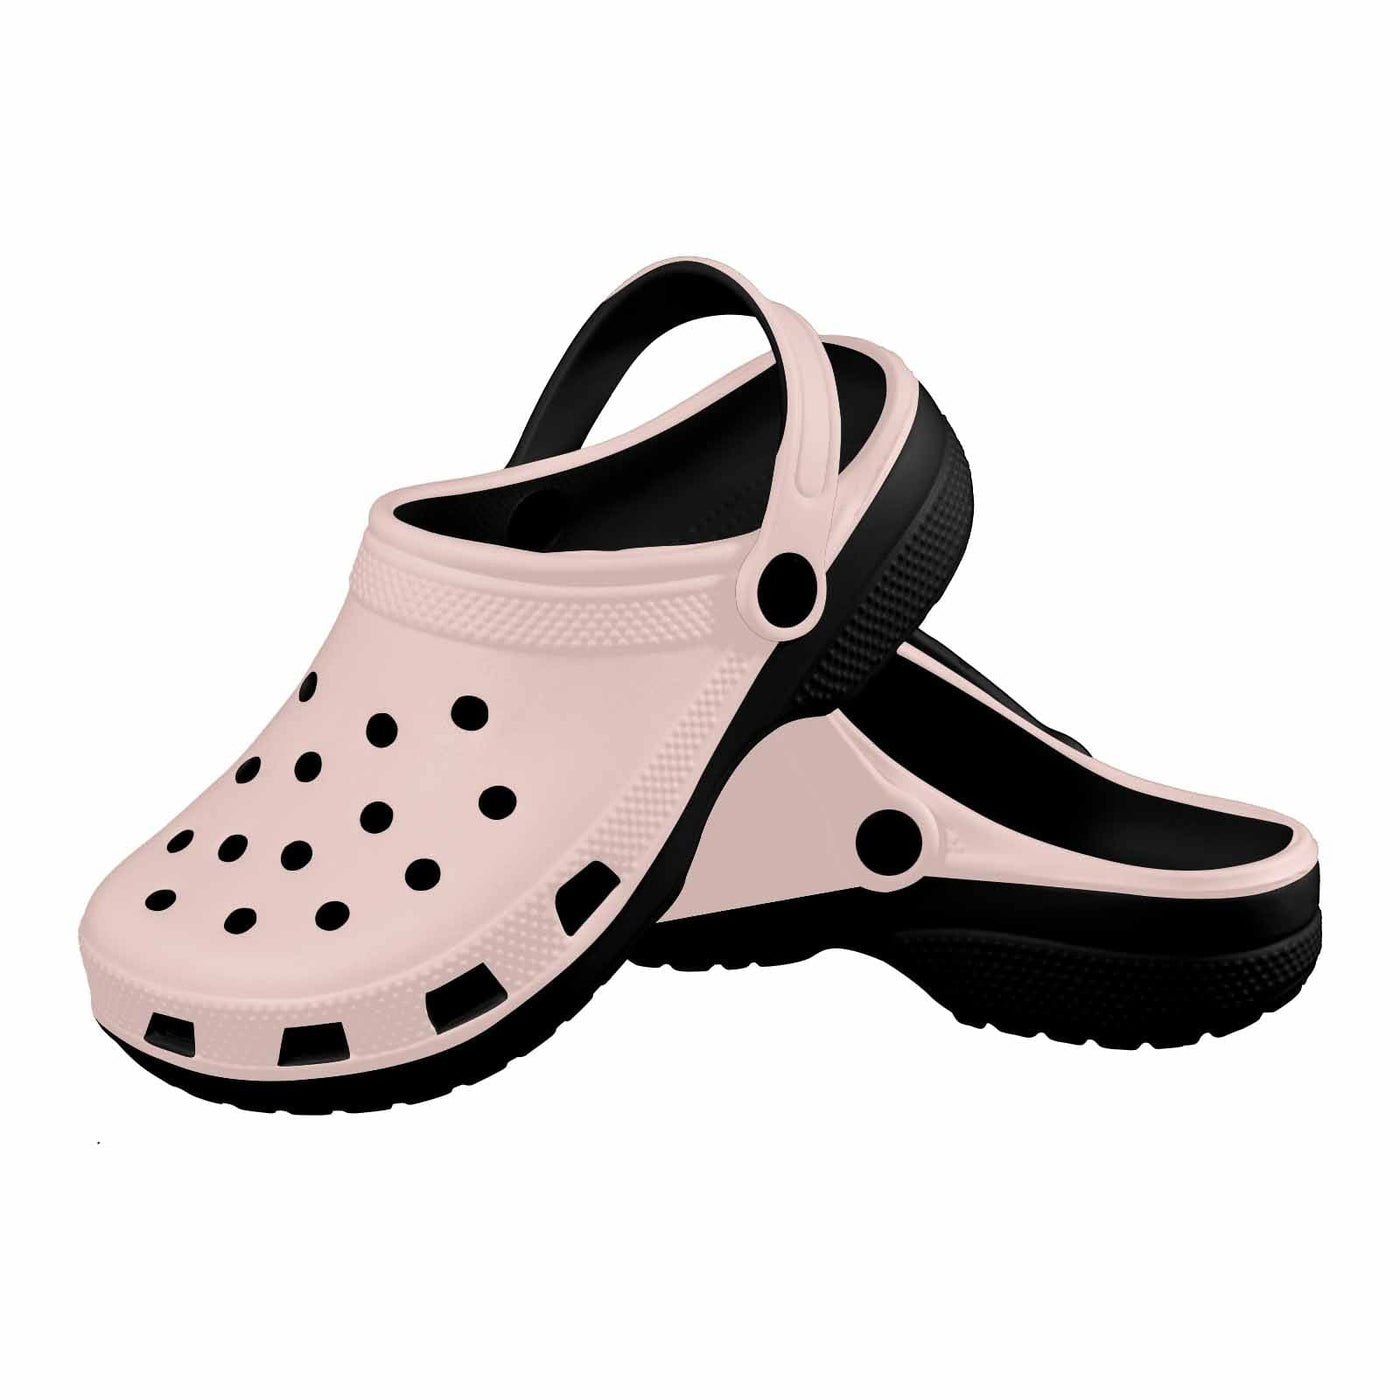 Scallop Seashell Pink Adult Clogs - Unisex | Clogs | Adults